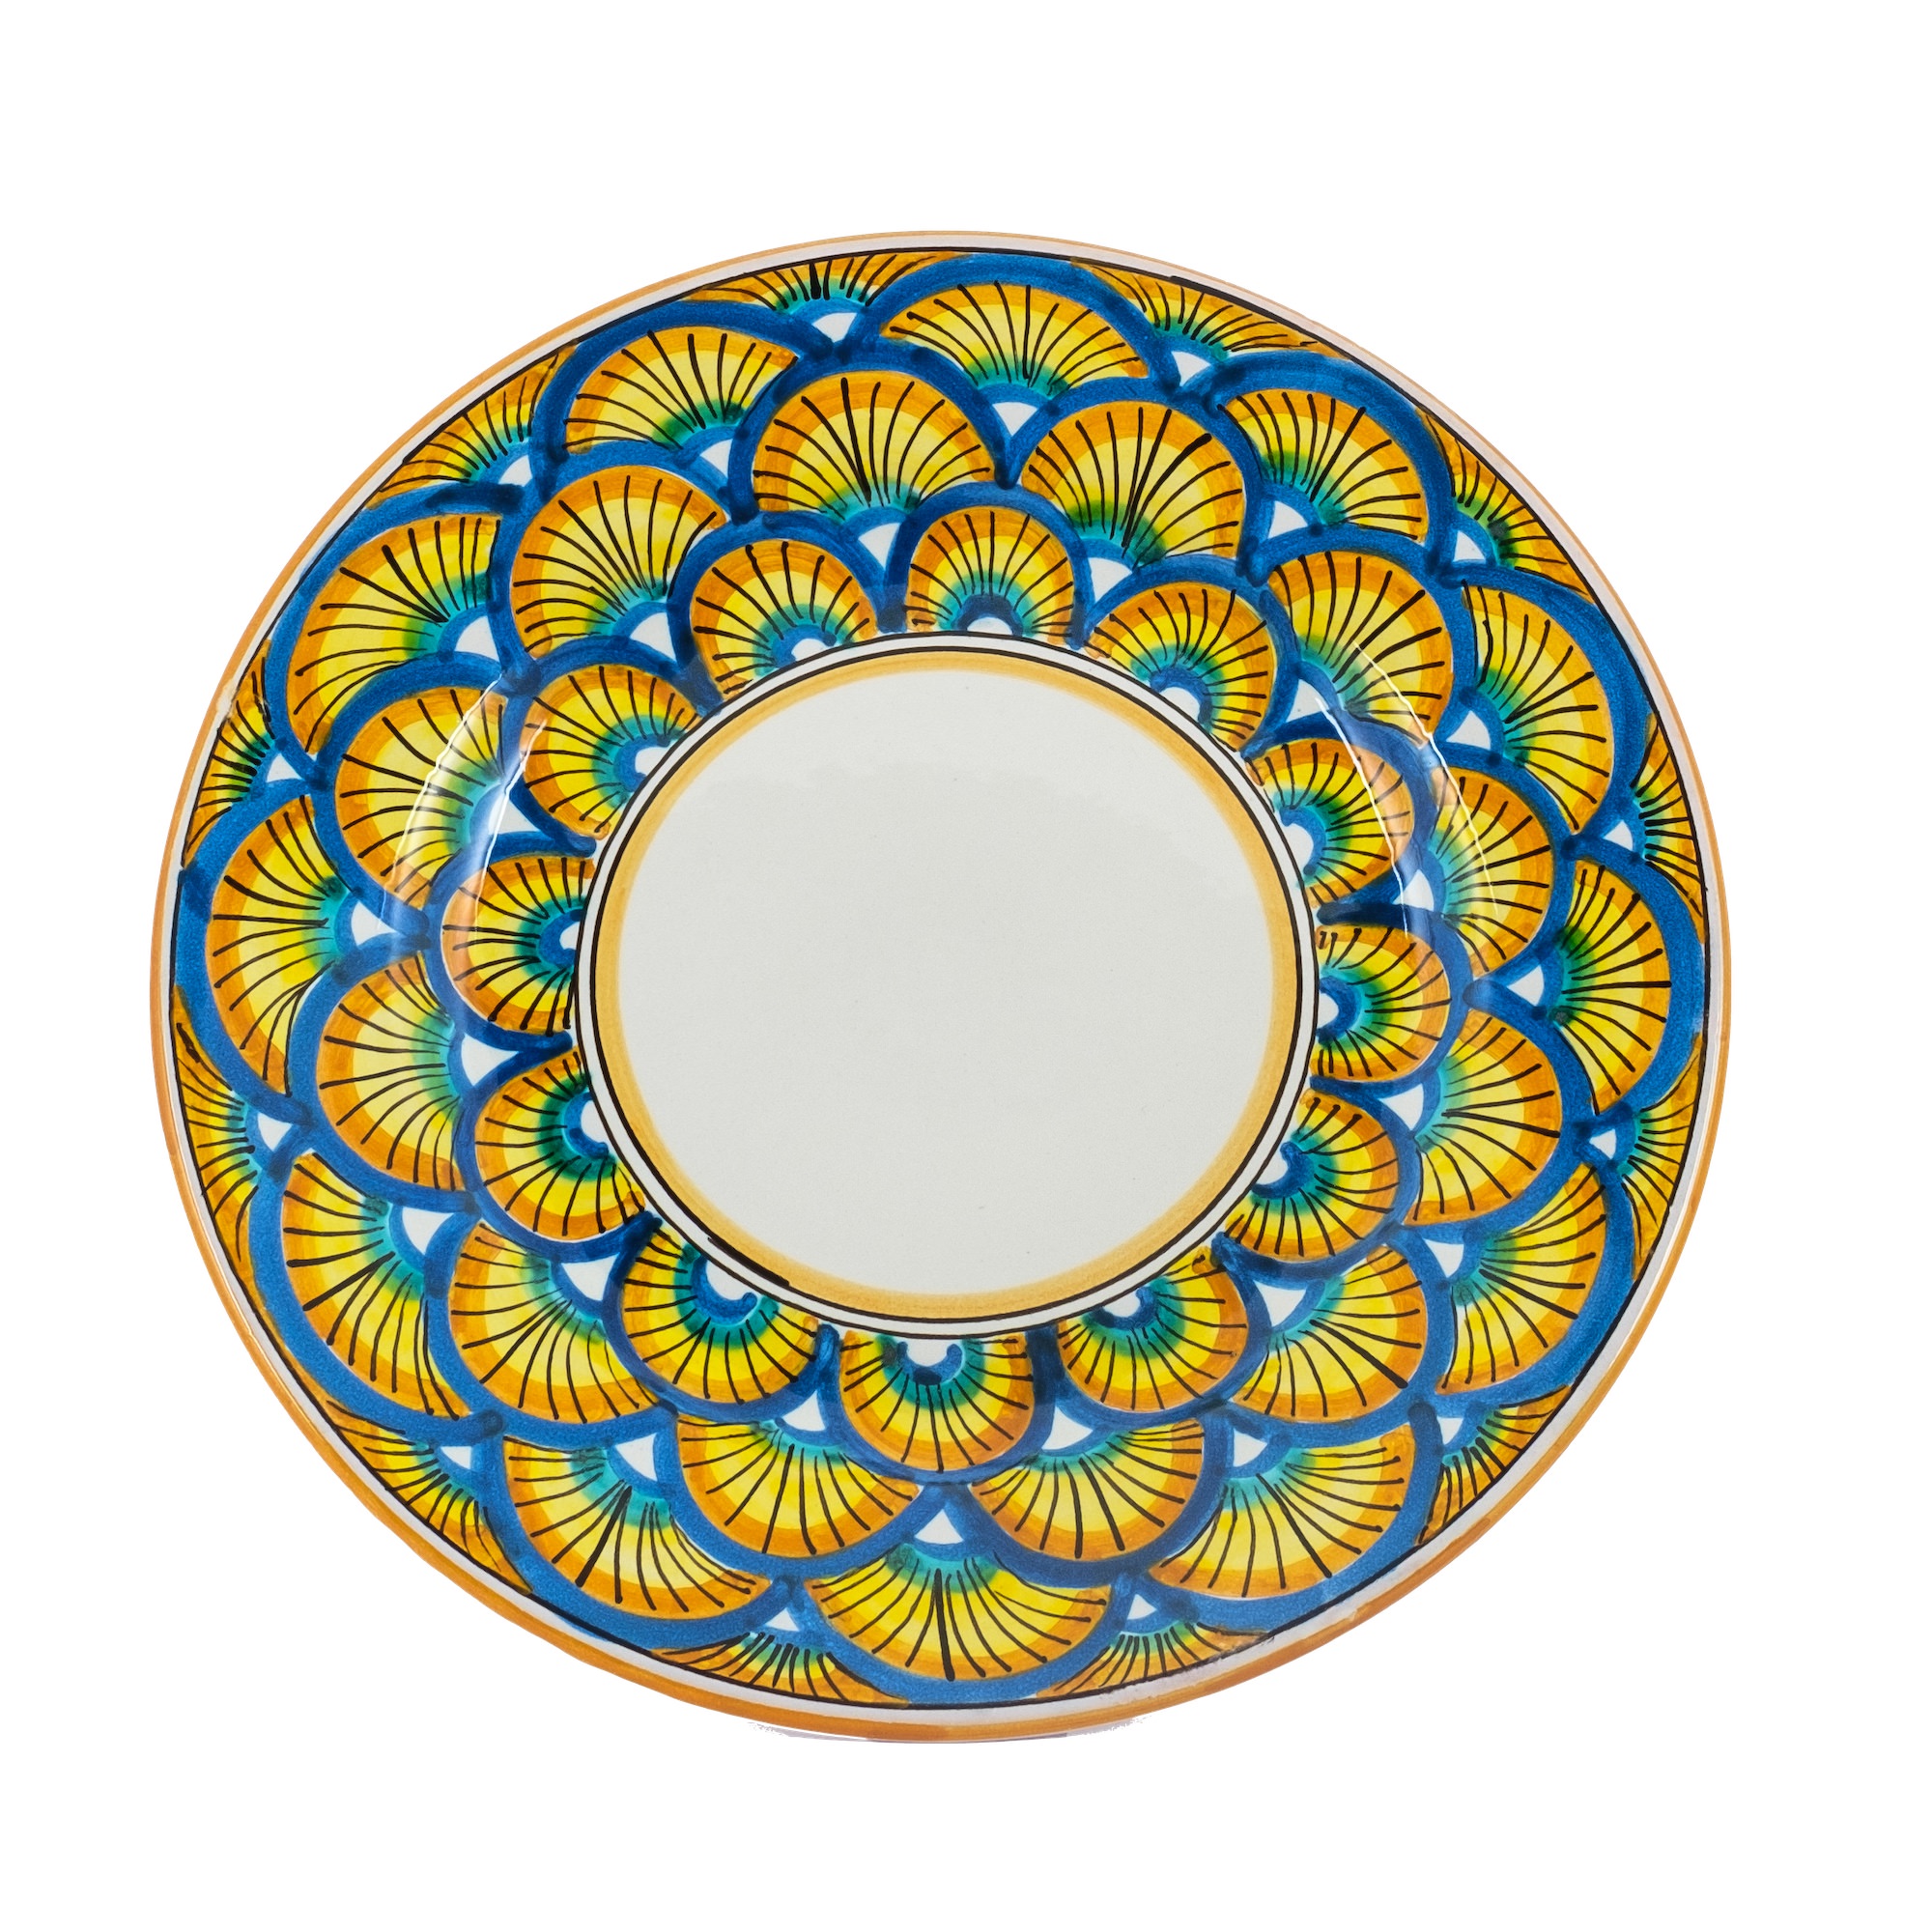 Collections dishes Ego the yellow Montedoro. Caltagirone - Sicilia